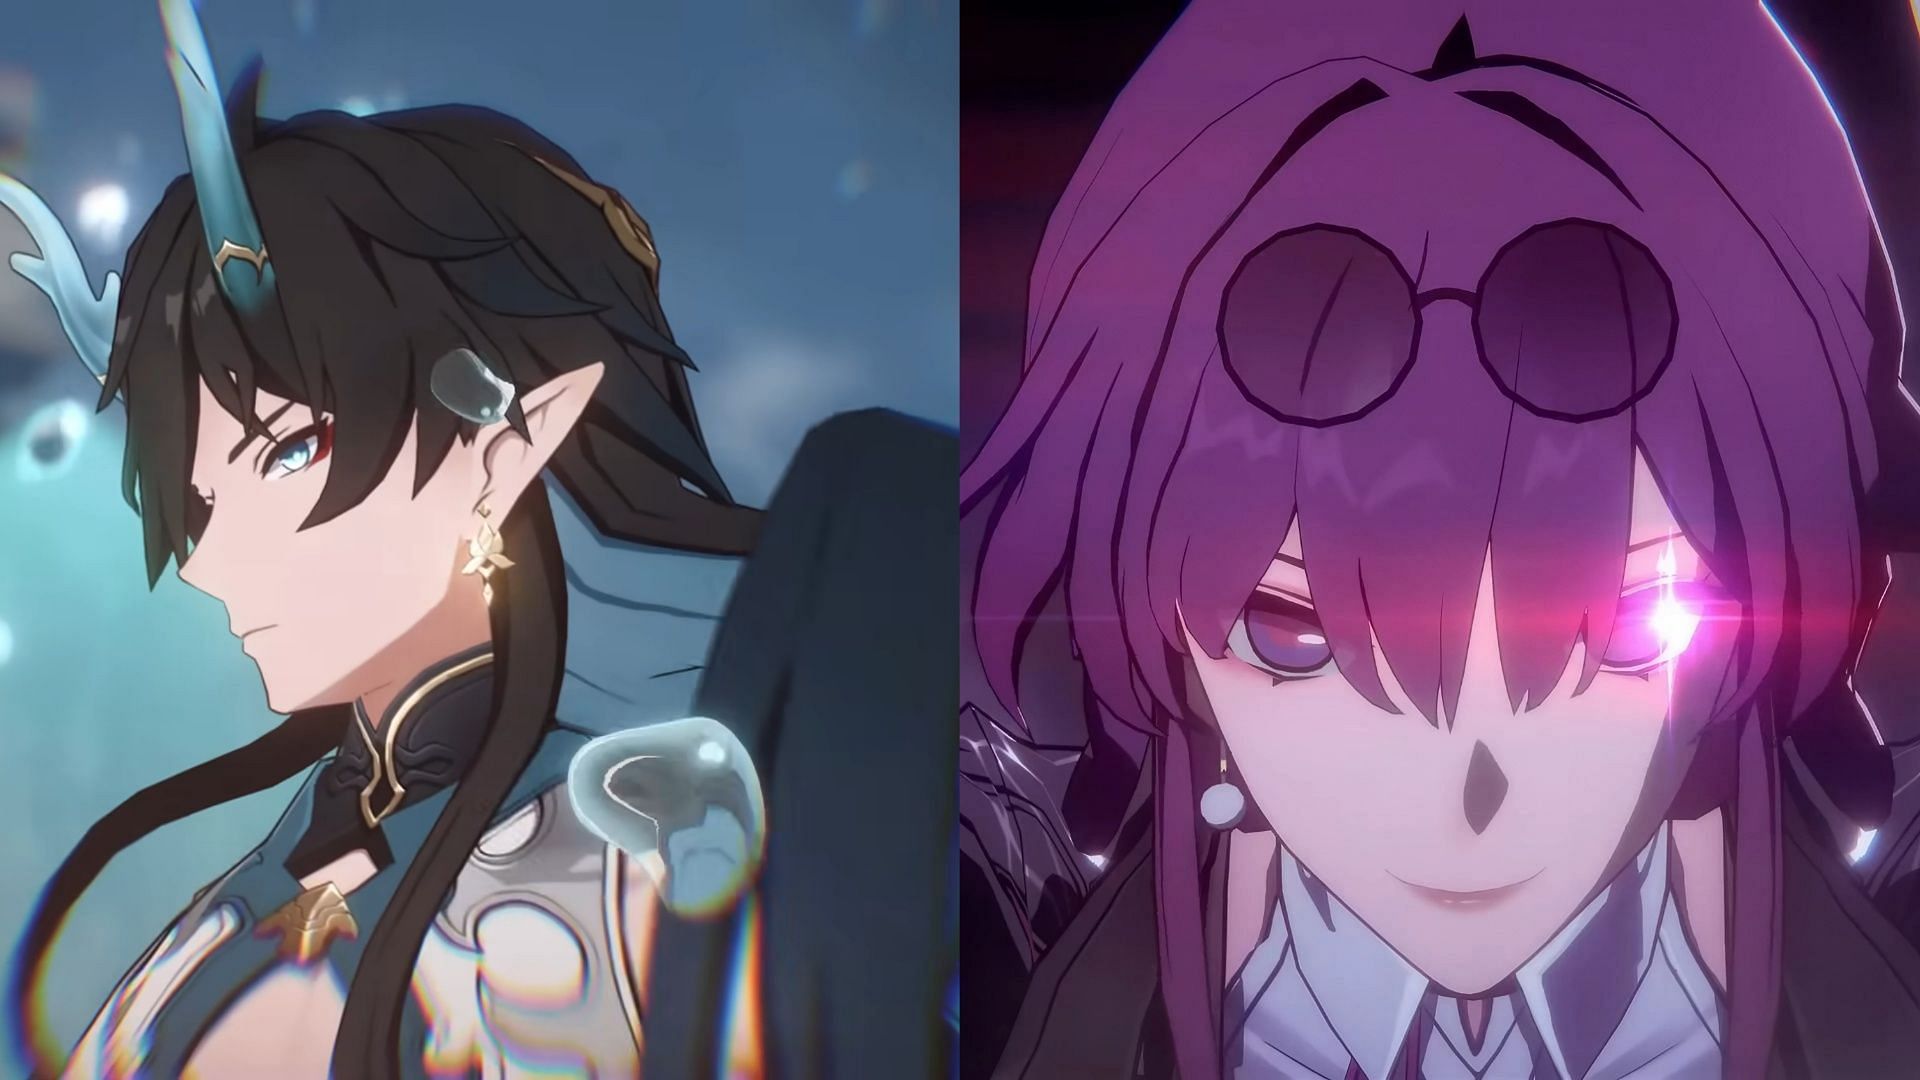 Screengrab of Kafka and Imbibitor Lunae from their respective trailers